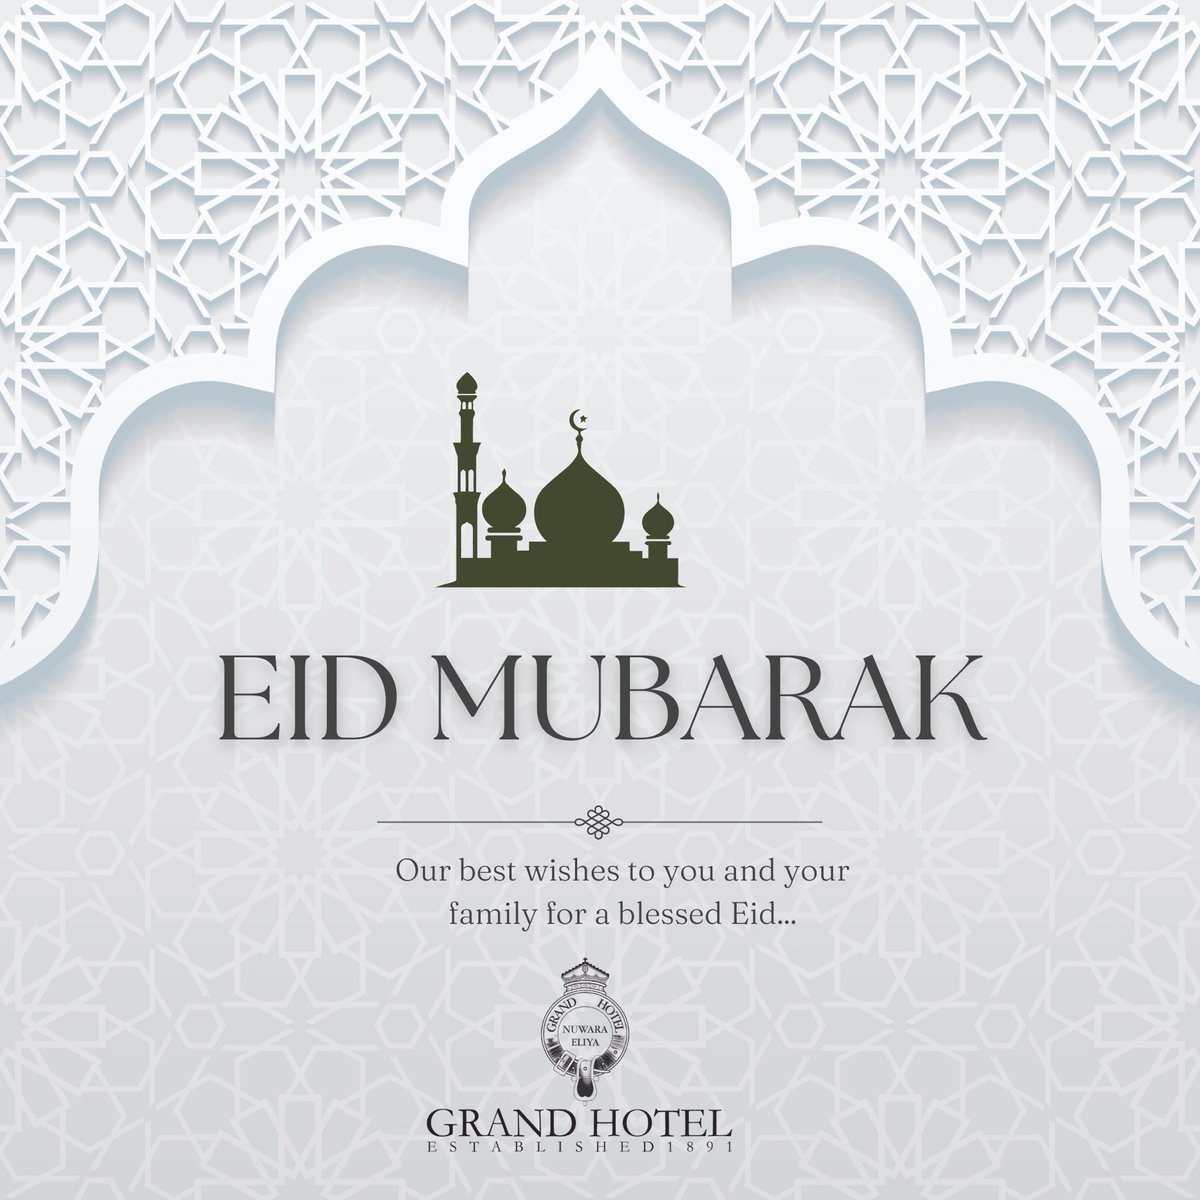 Eid Mubarak! May this special day bring you joy, peace, and prosperity. Wishing you and your loved ones a blessed Eid filled with happiness and love! #eidmubarak #grandhotel #nuwaraeliya